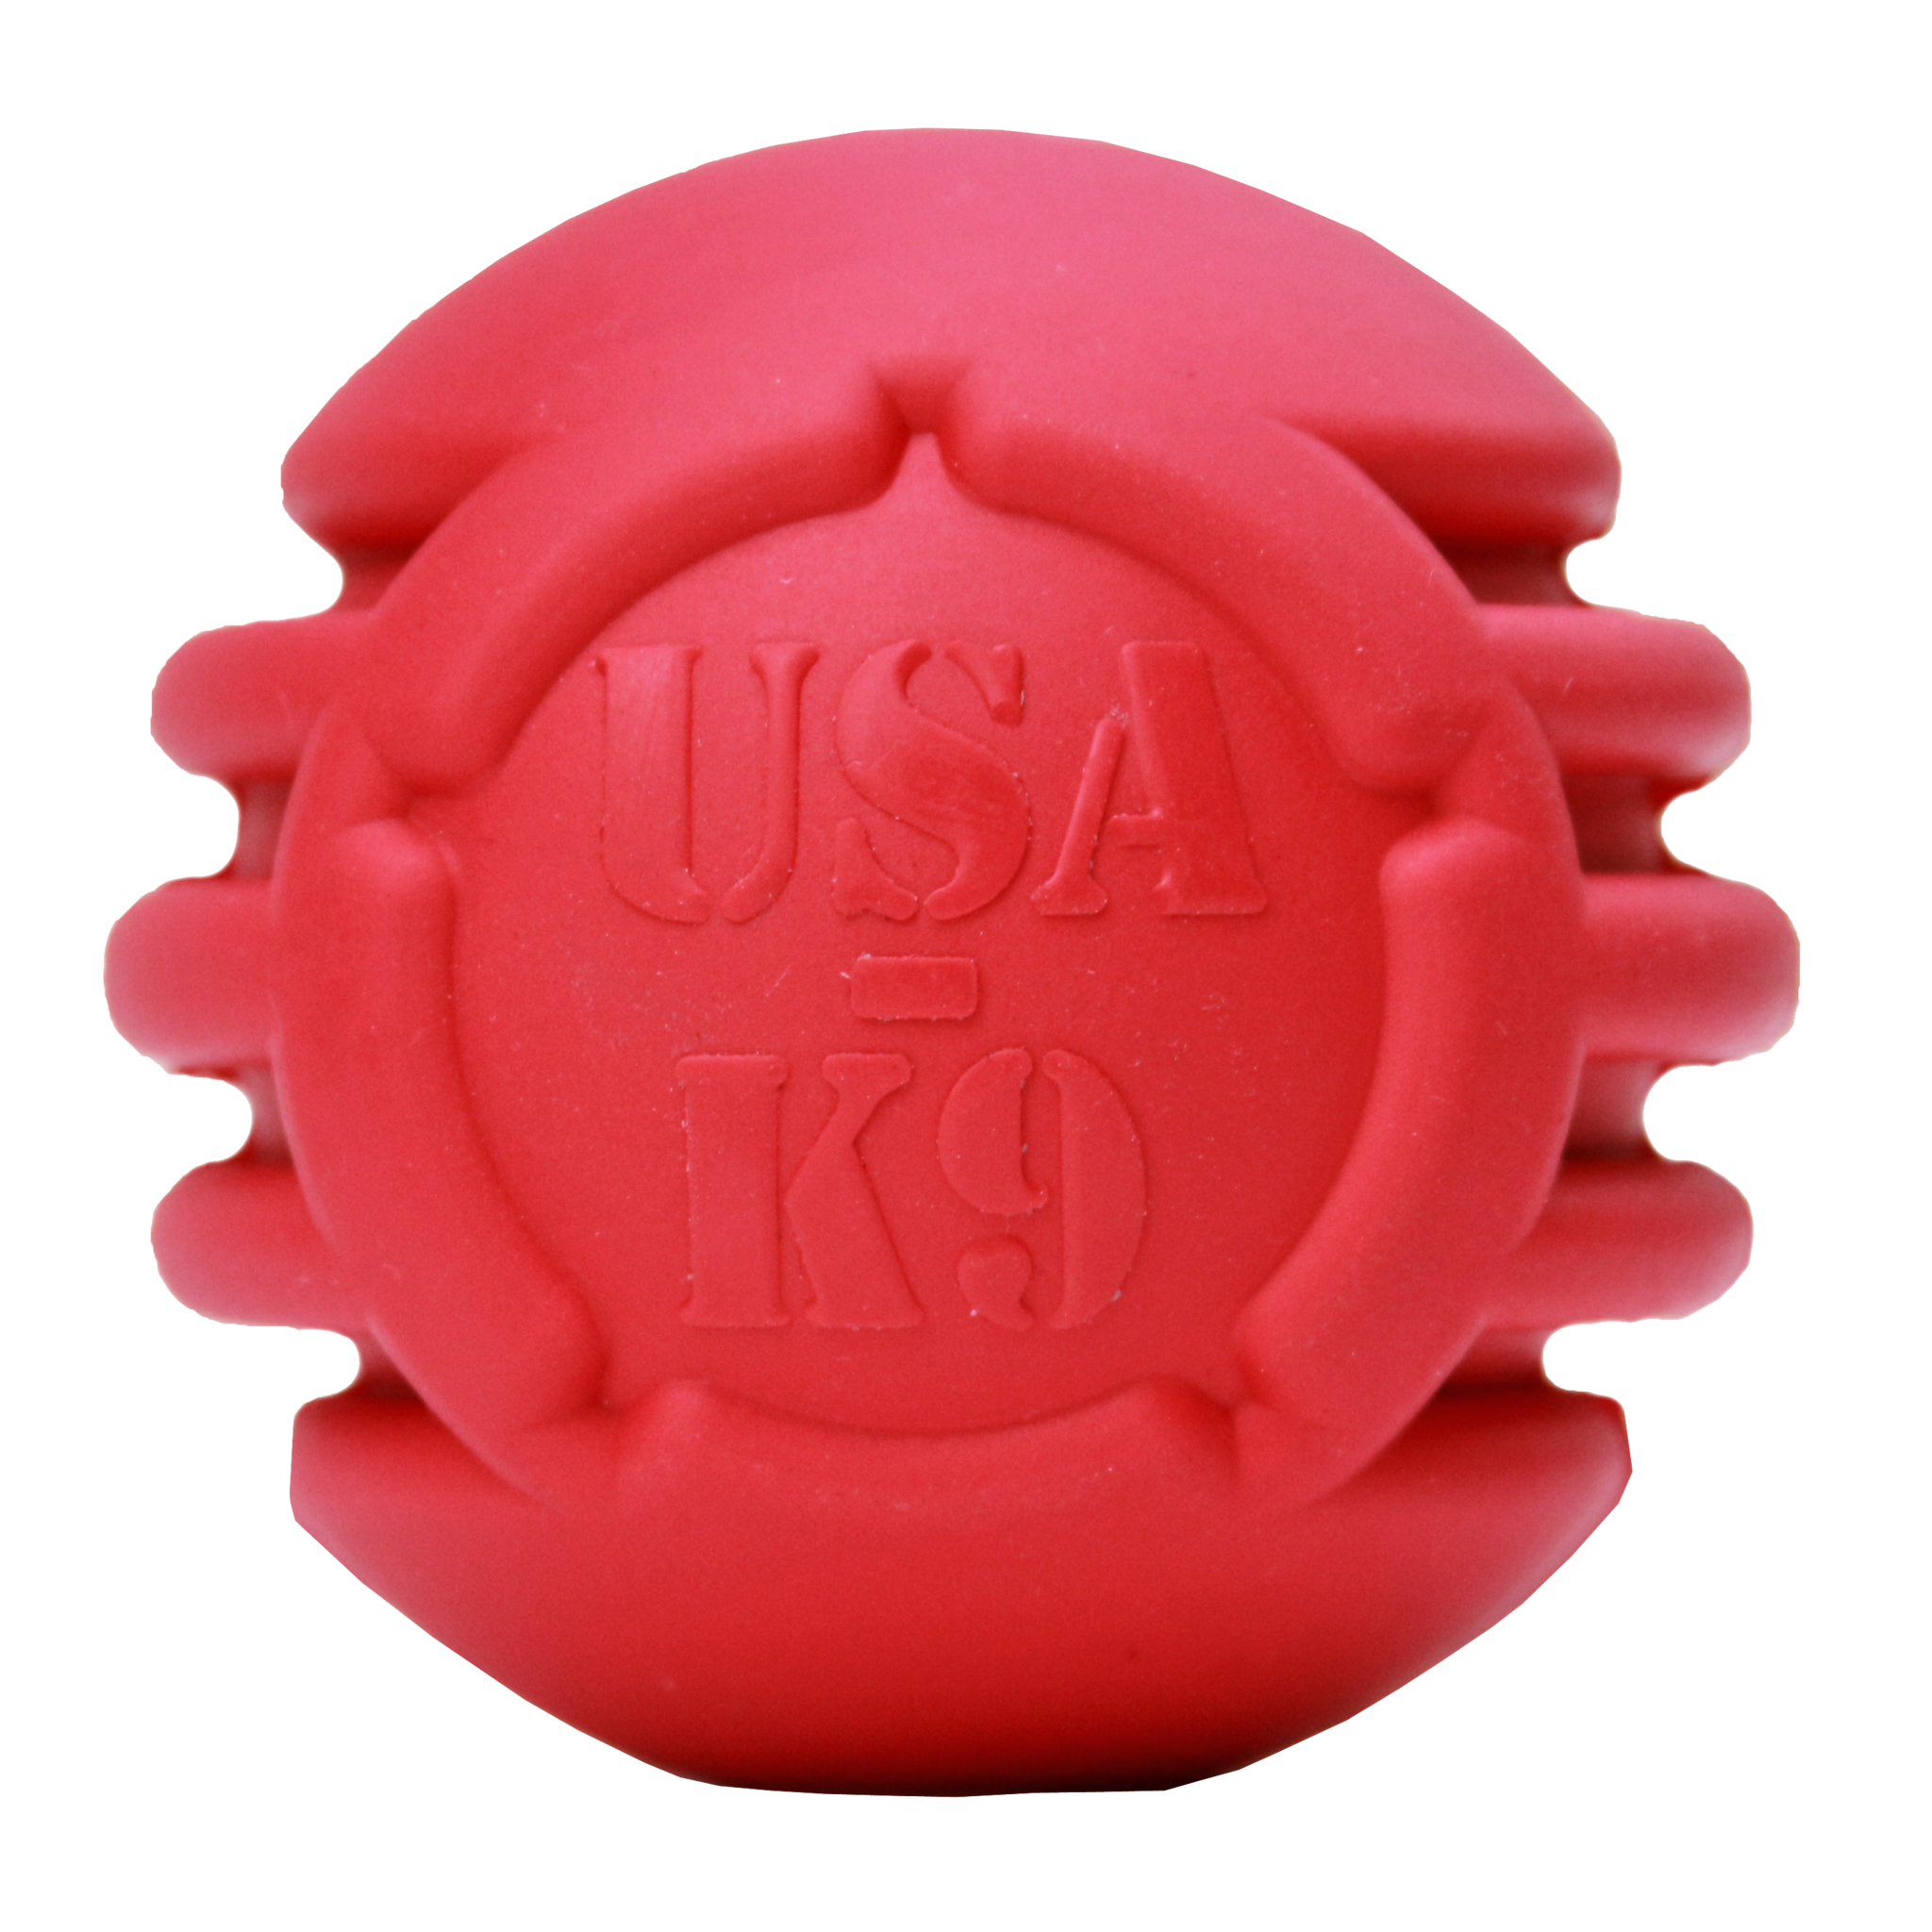 USA-K9 Stars and Stripes  |  Durable Rubber Dog Ball